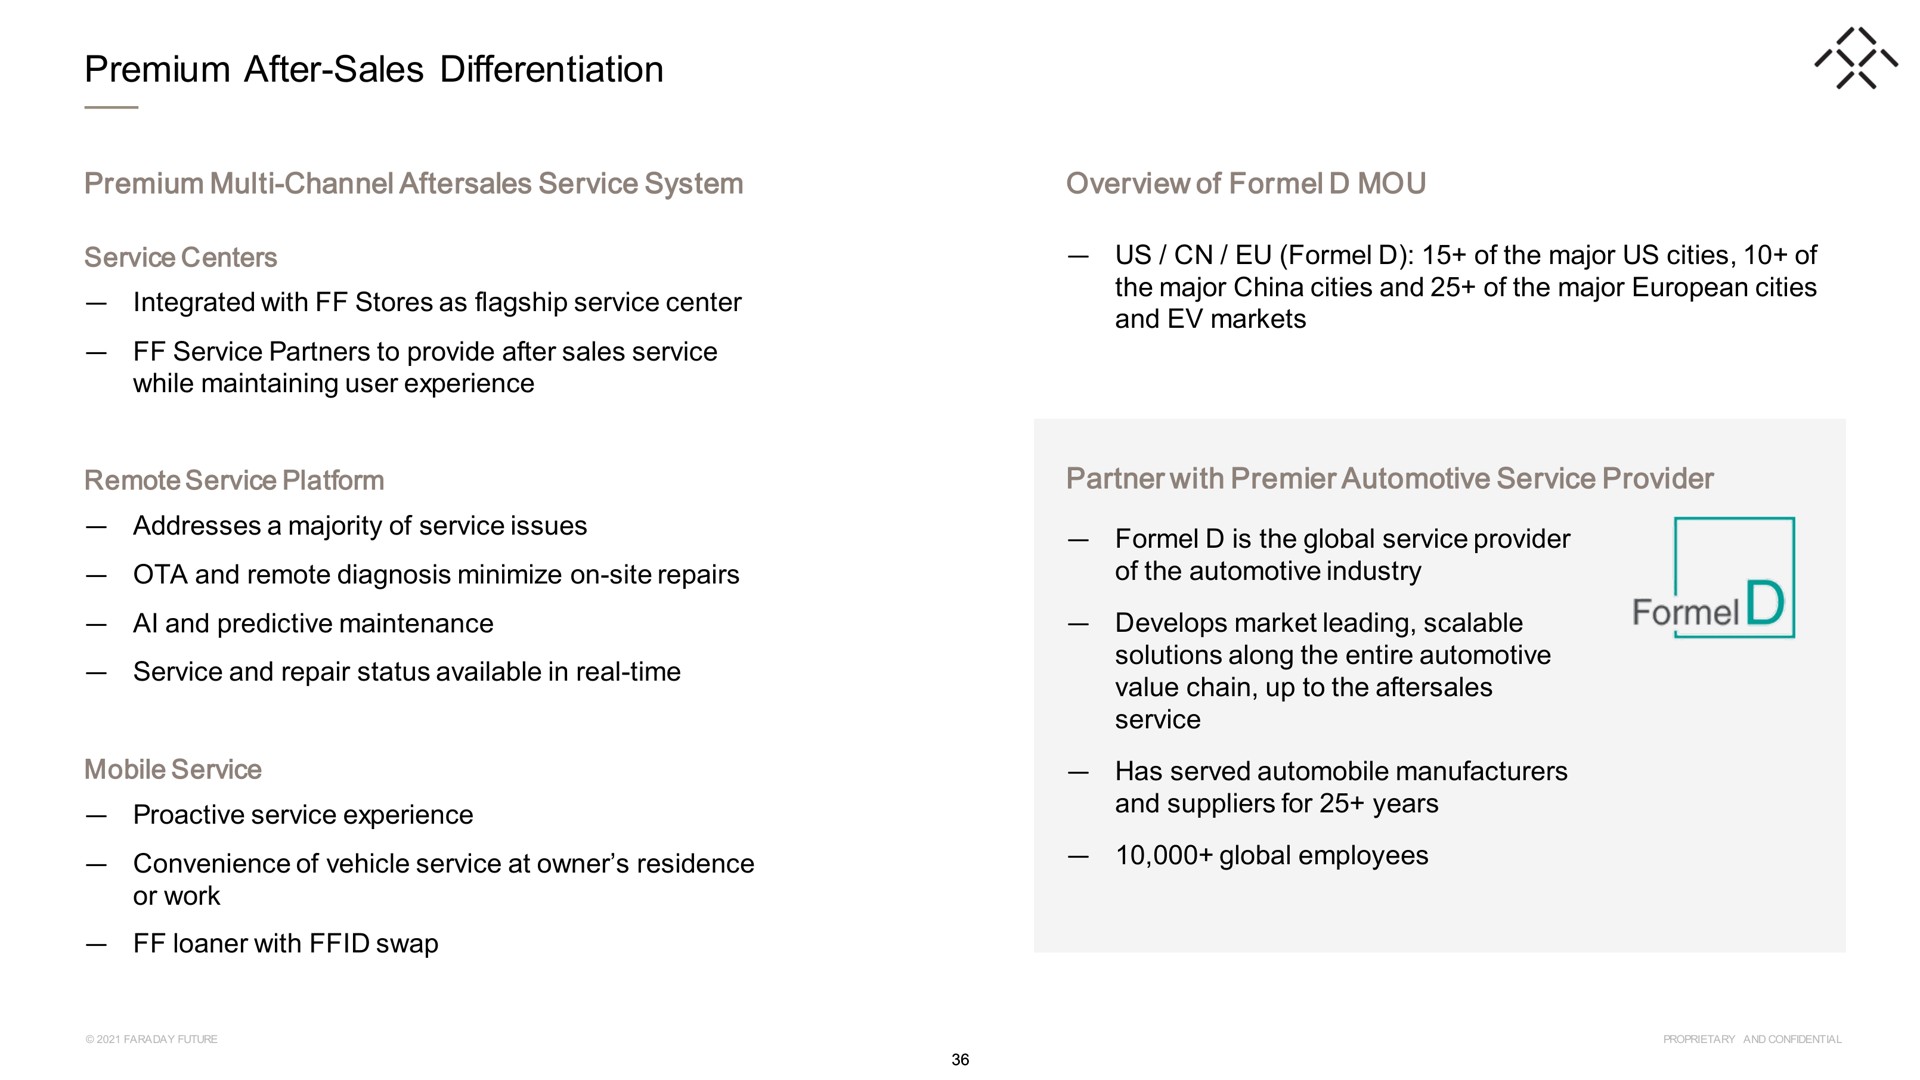 premium after sales differentiation premium channel service system overview of formel mou partner with premier automotive service provider | Faraday Future